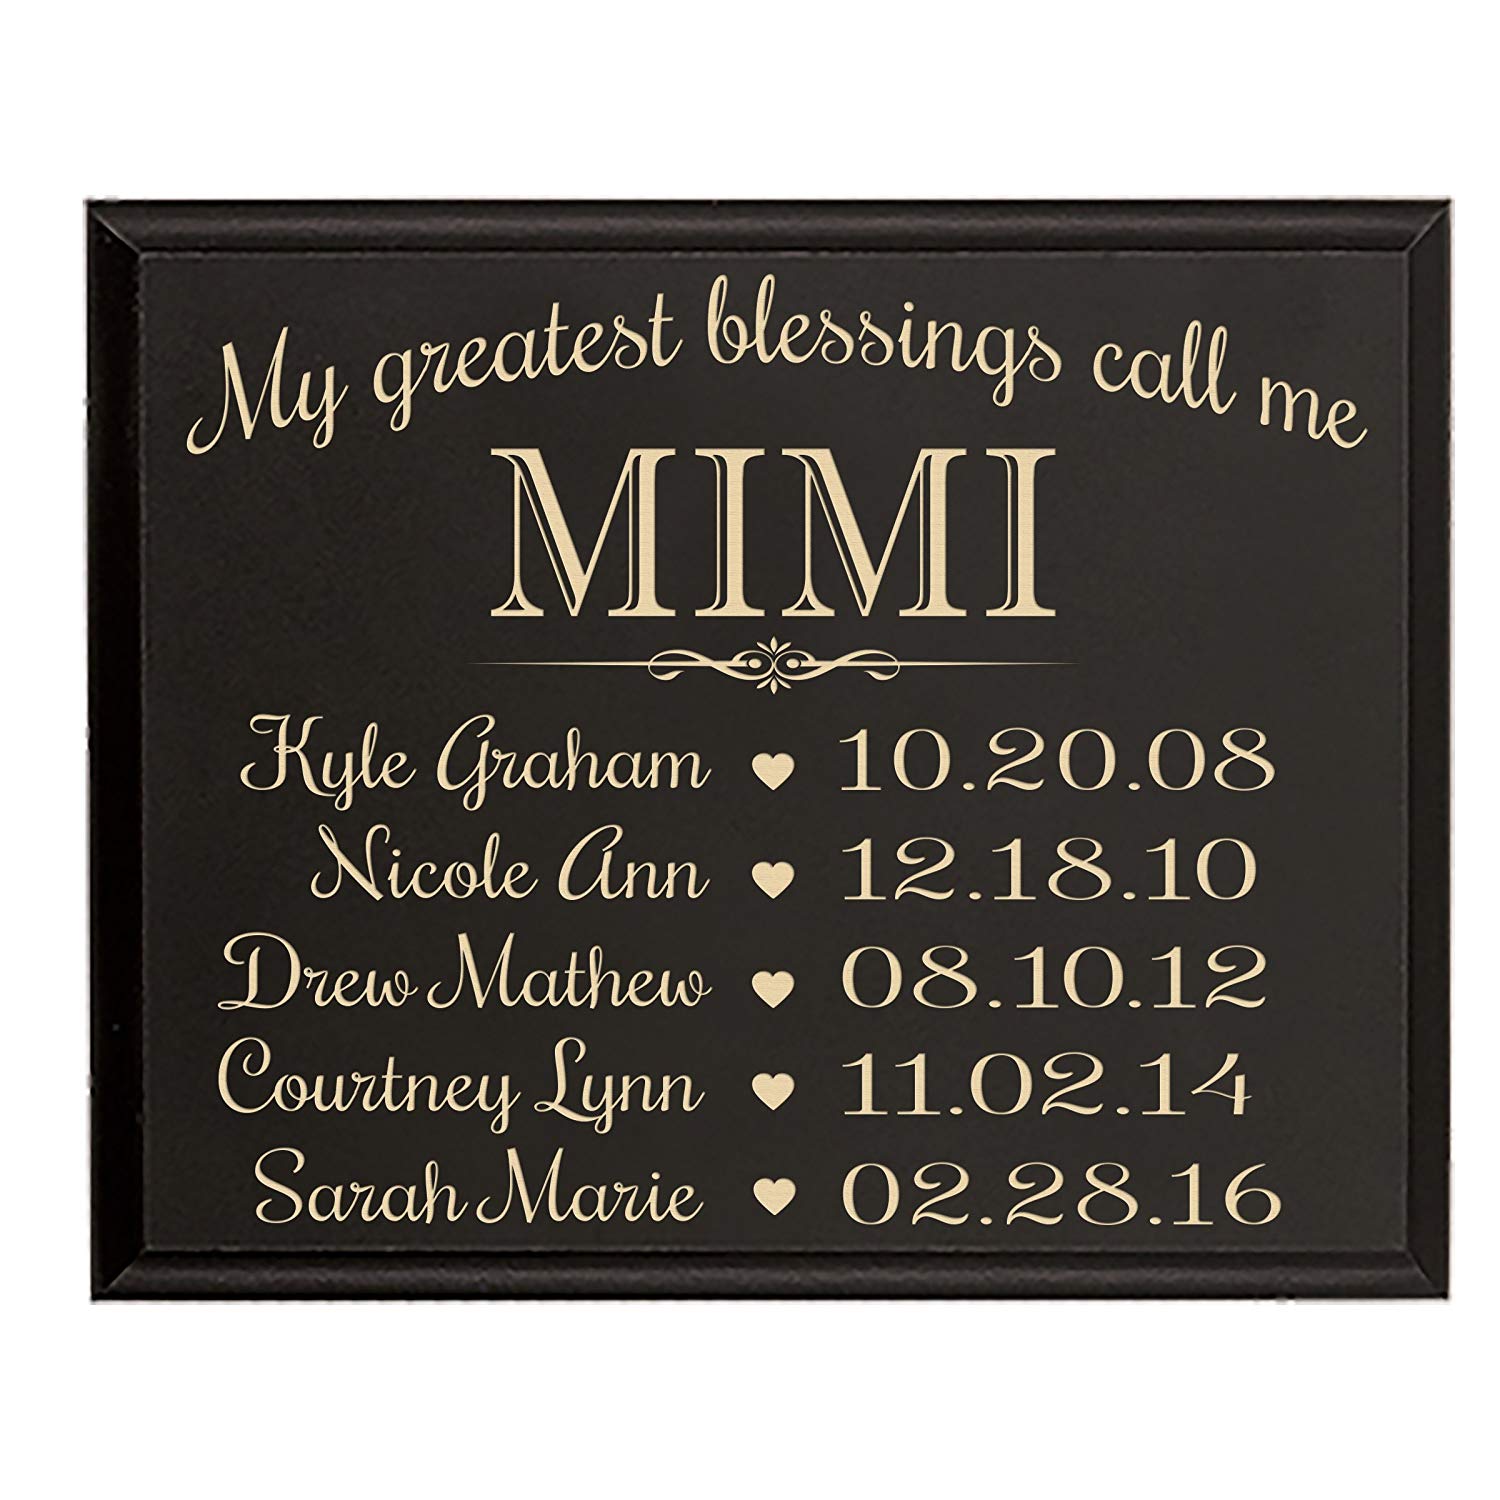 My Greatest Blessings Call Me Mimi Wall Plaque - LifeSong Milestones